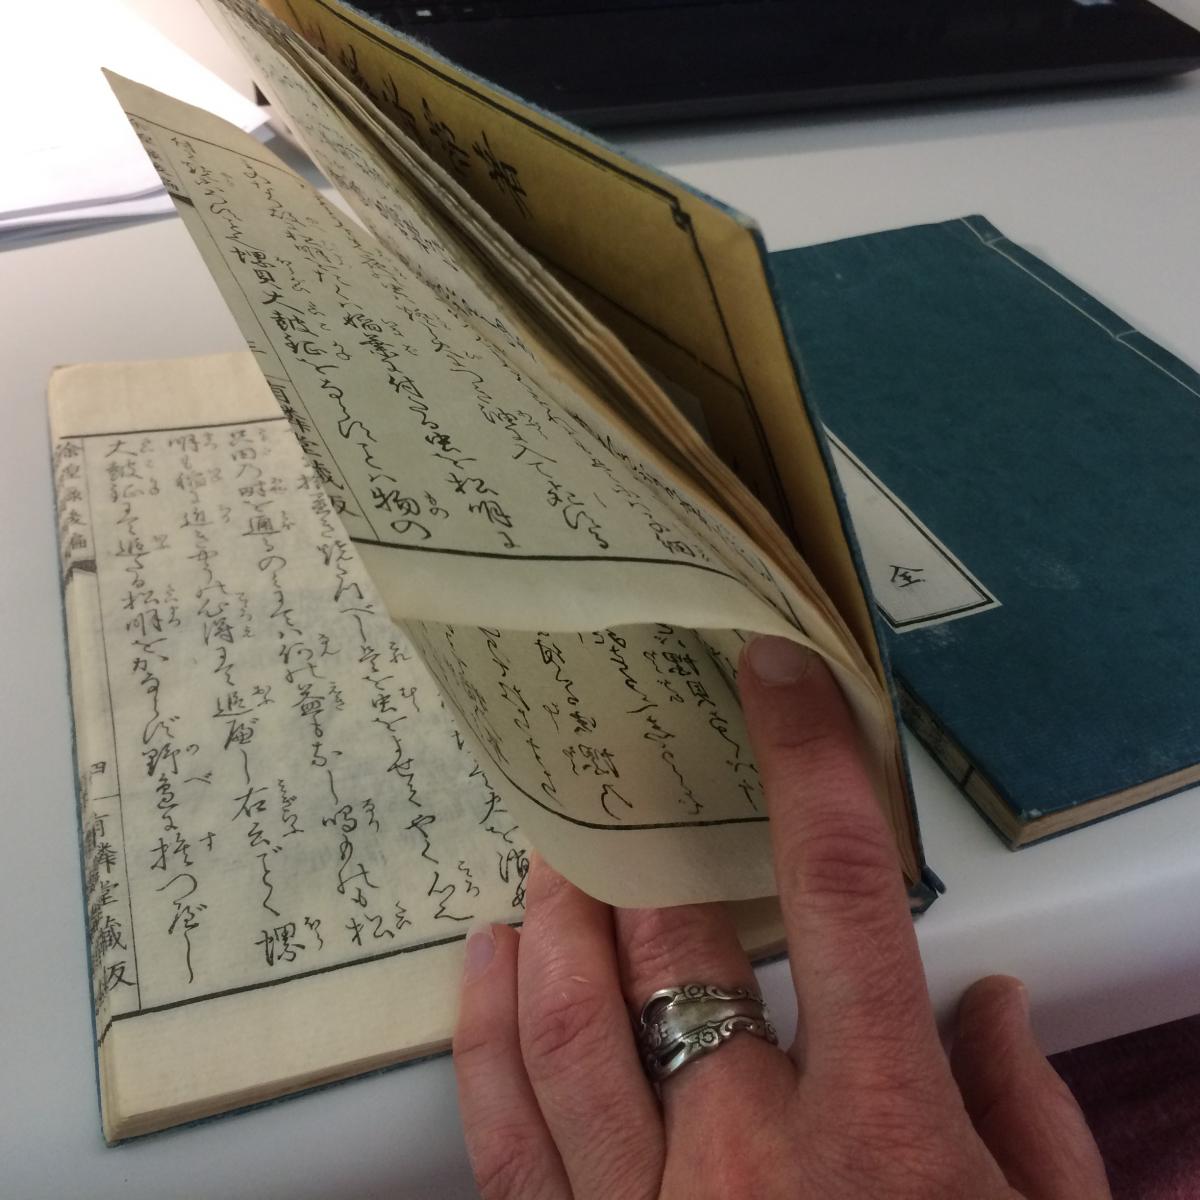 Pages of the Japanese bound book.